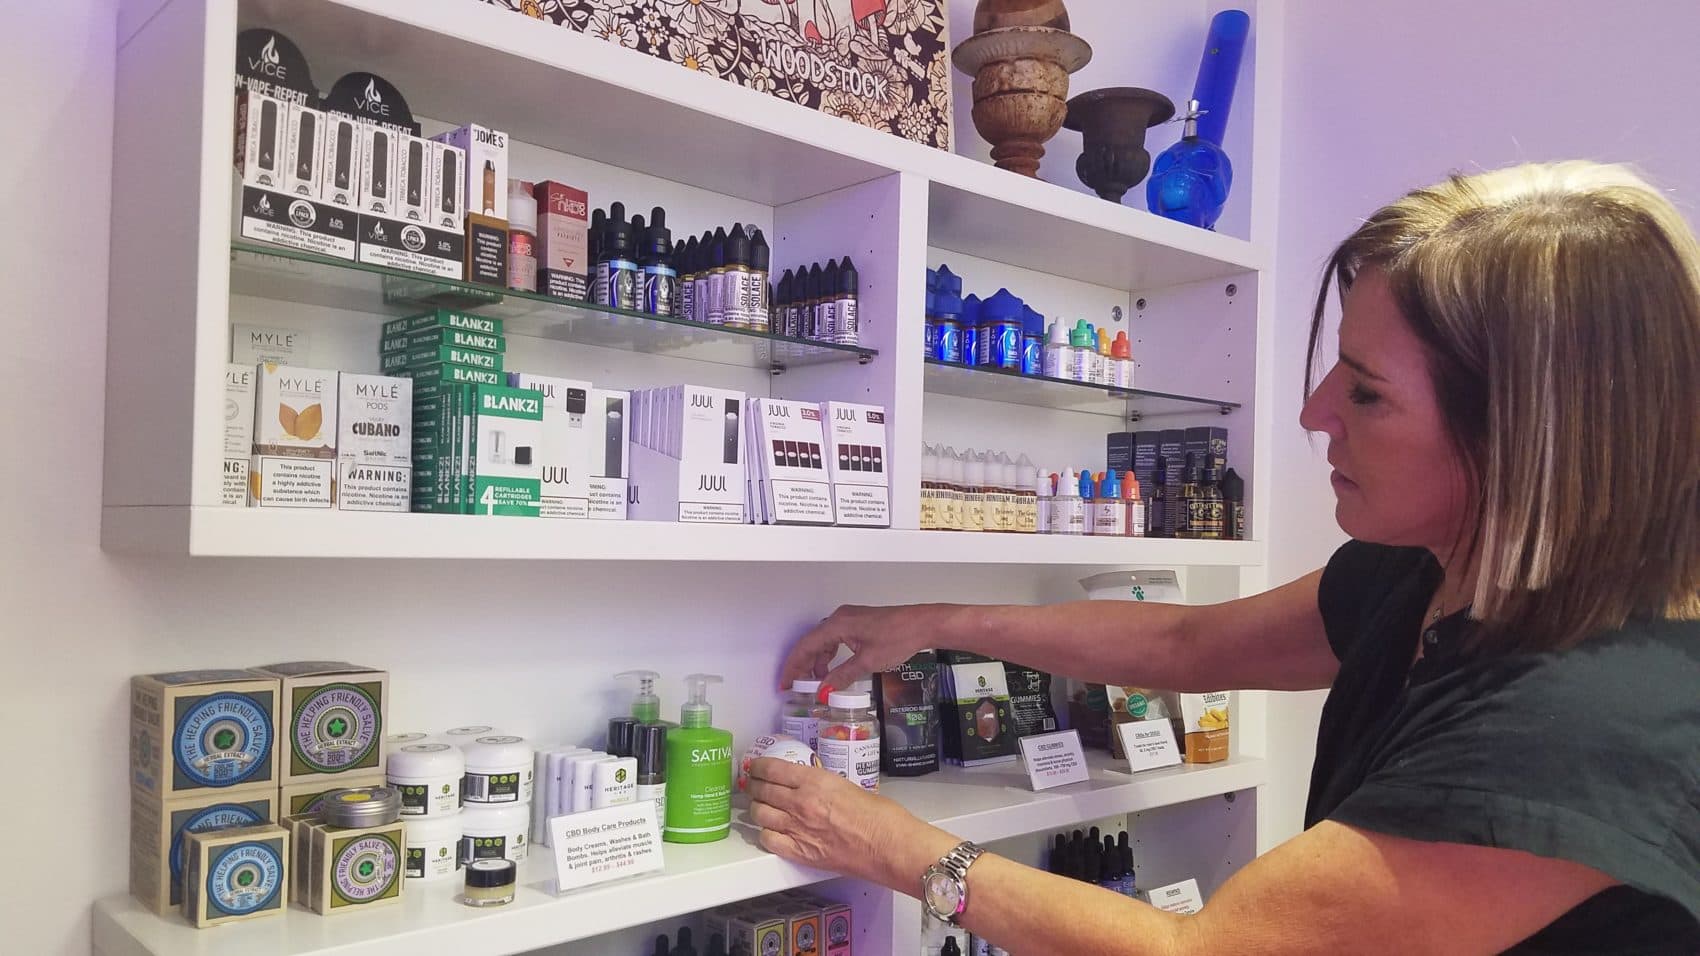 Stacy Poritzky, co-owner of Vape Daddy's in Newton, is re-branding her vape business after a ban on vape sales was lifted in mass. She plans to sell more vaping accessories and CBD products as well as a hydroponic growth system that customers can use to grow marijuana. (Zeninjor Enwemeka/WBUR)